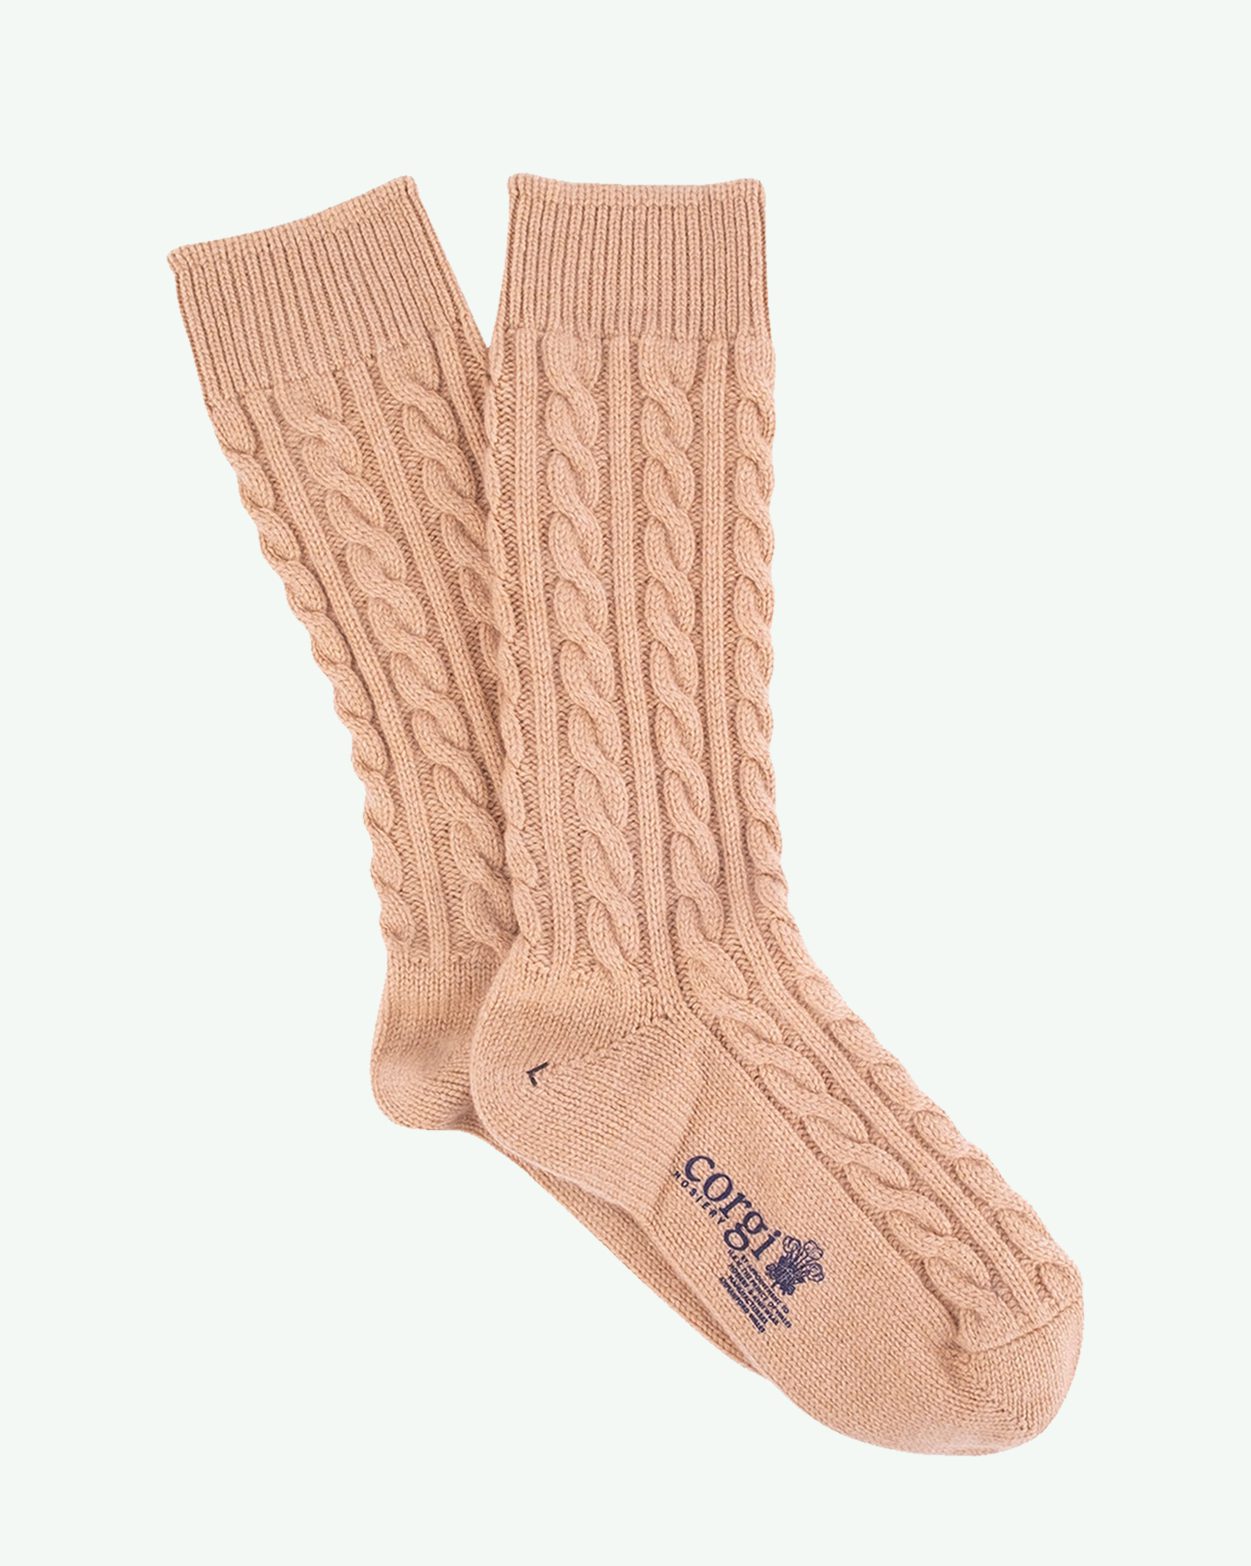 These are the socks you want to find in your stocking this